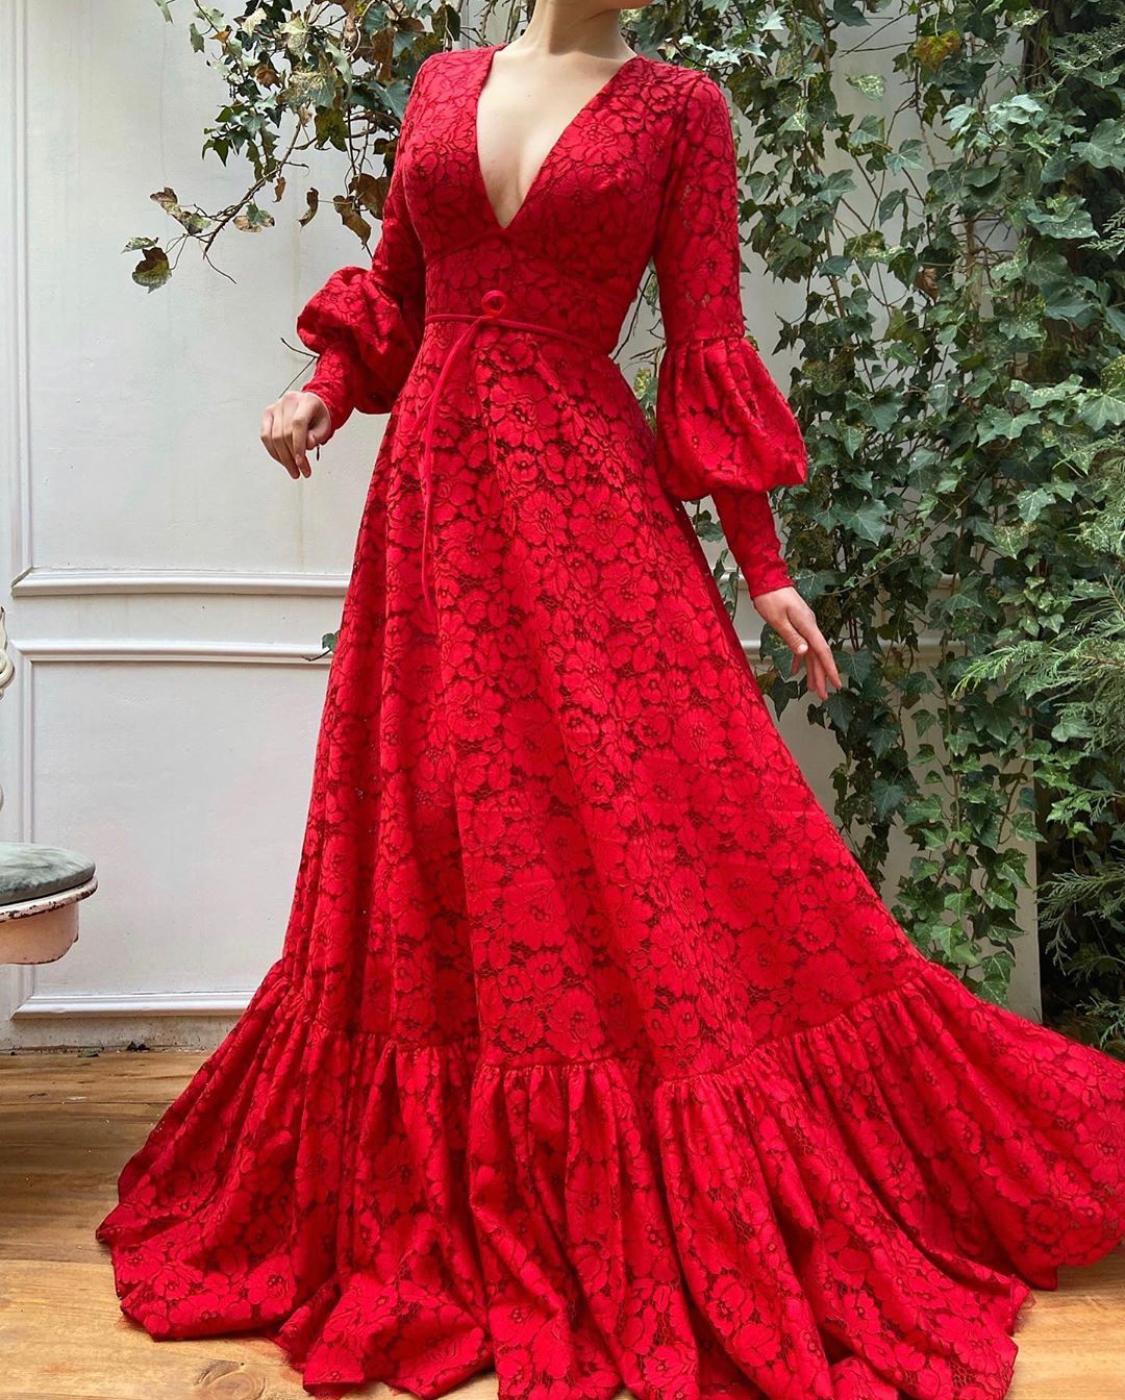 Red A-Line dress with v-neck and long sleeves